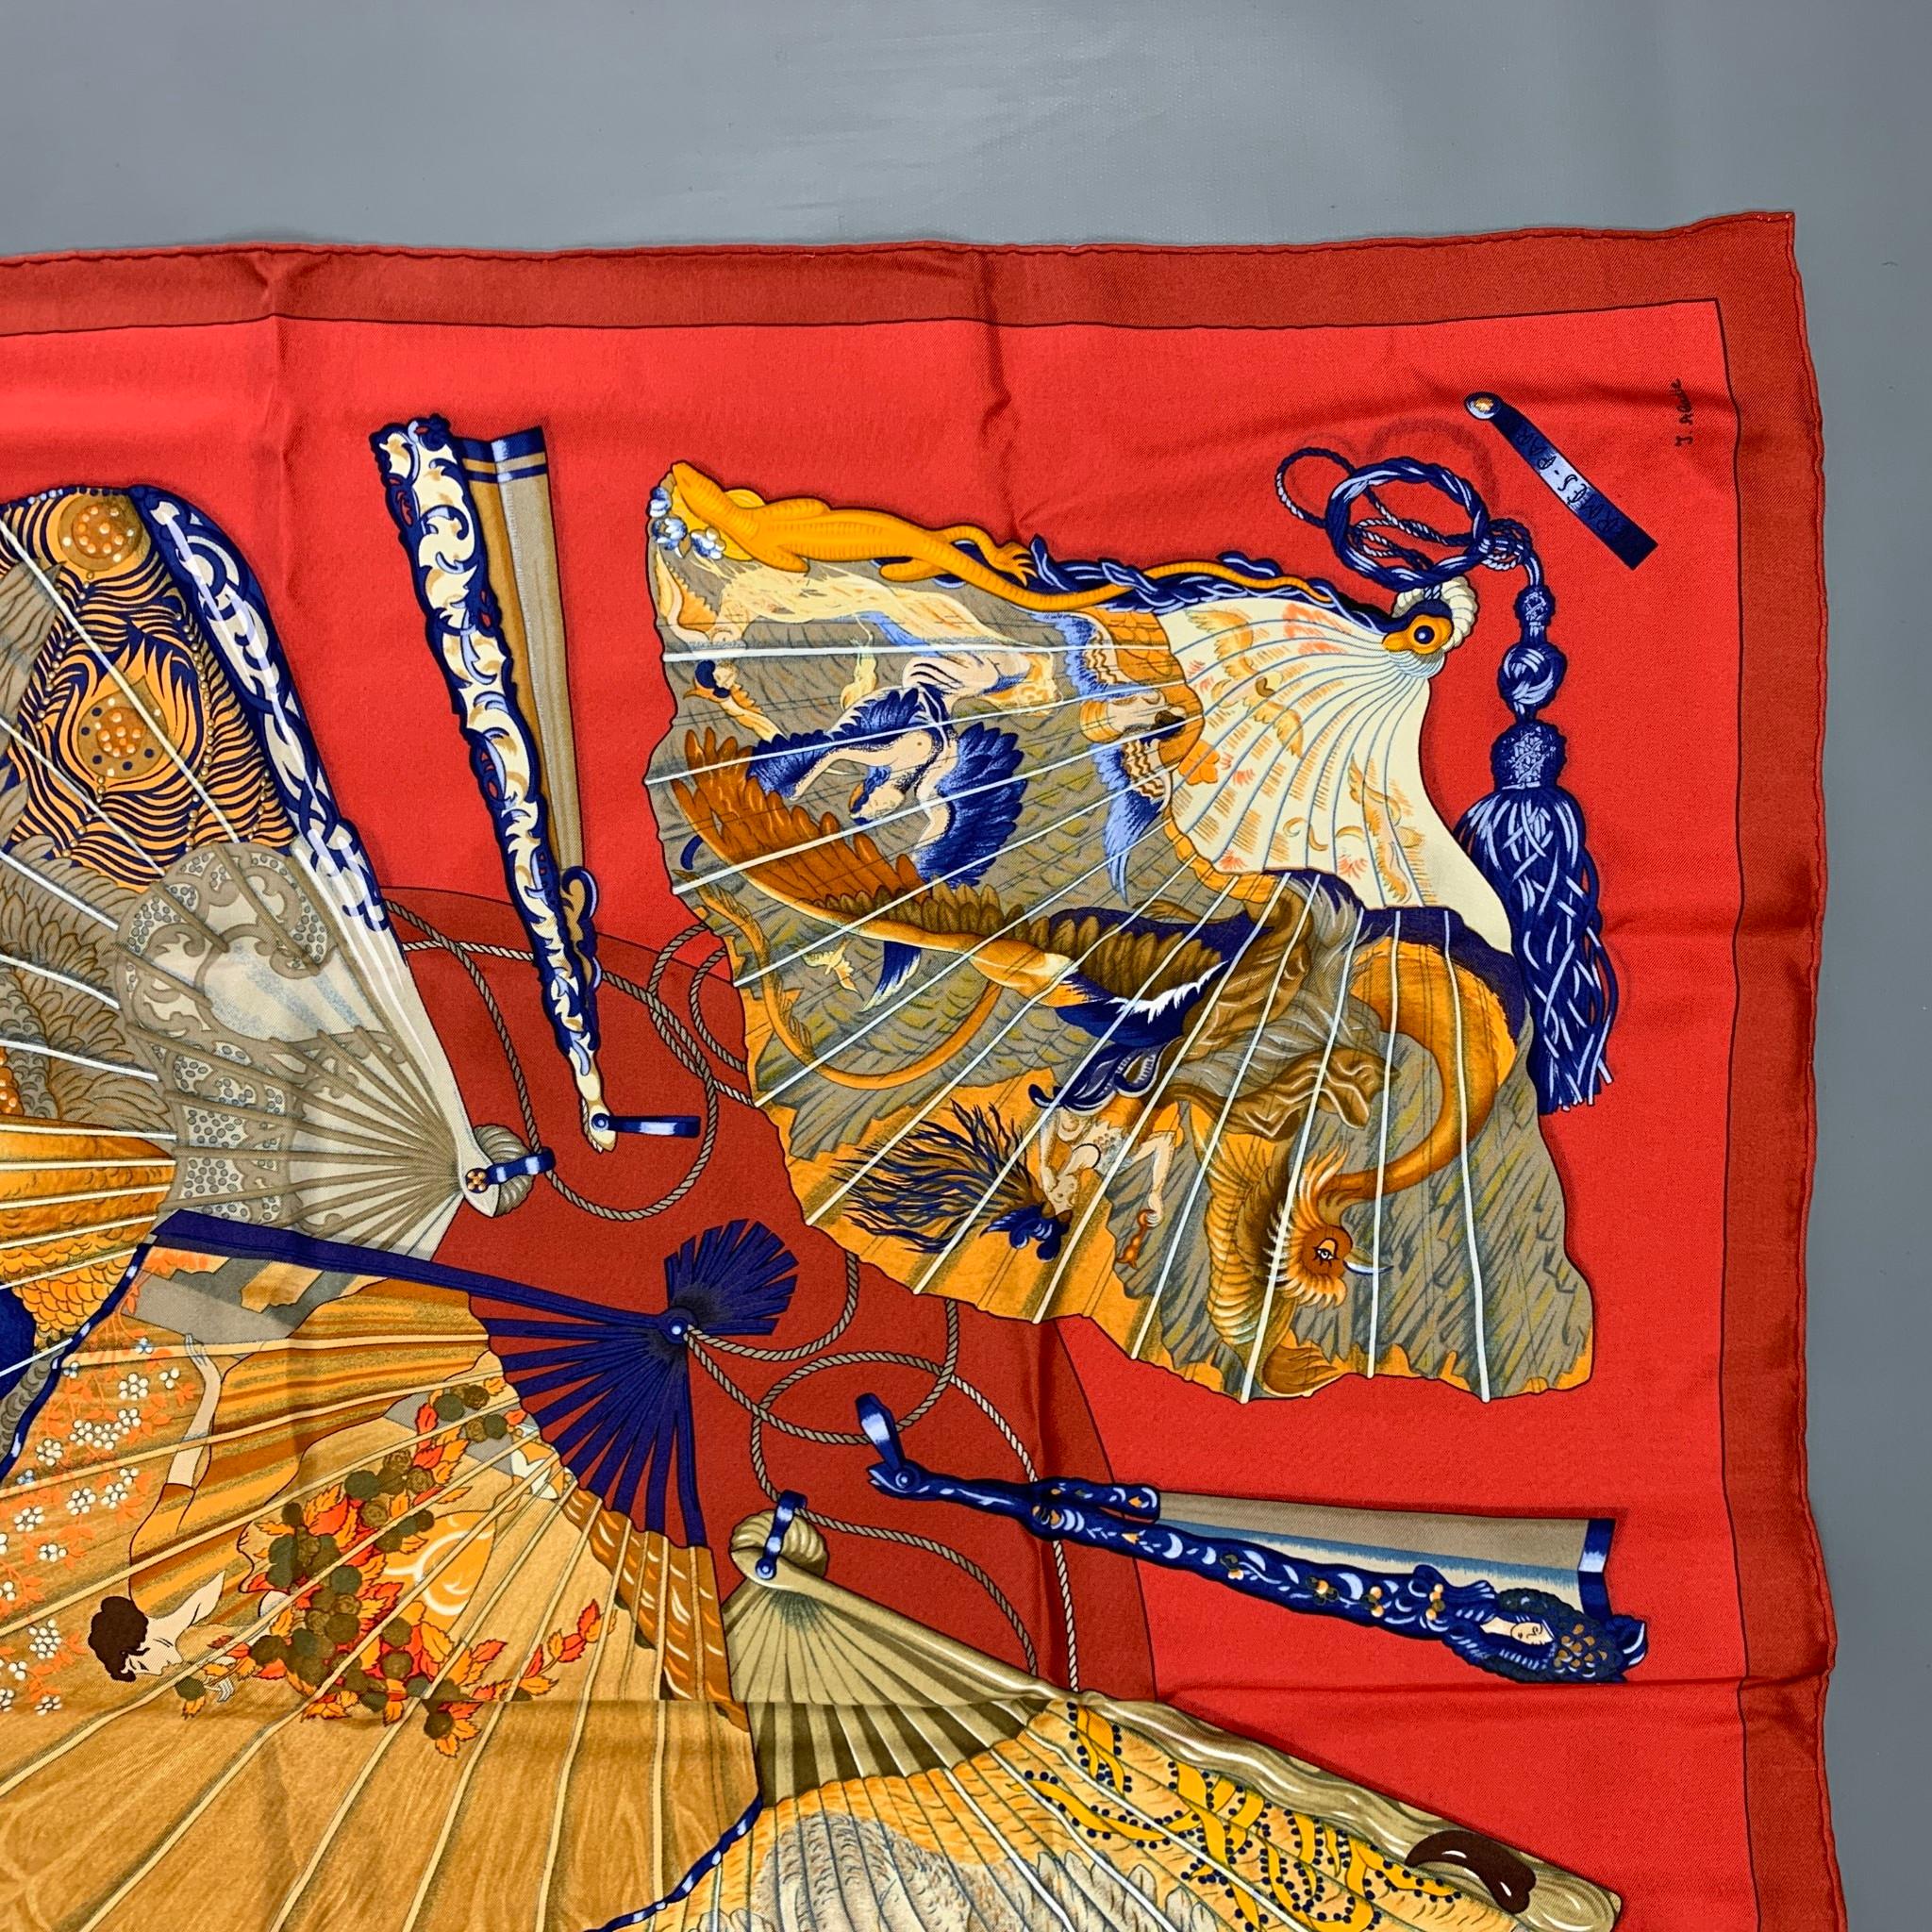 HERMES 'Brise de Charme' scarf comes in a gold & red print silk featuring hand rolled edges. Includes box. Made in France.

Very Good Pre-Owned Condition.

Measurements:

35 in. x 35 in